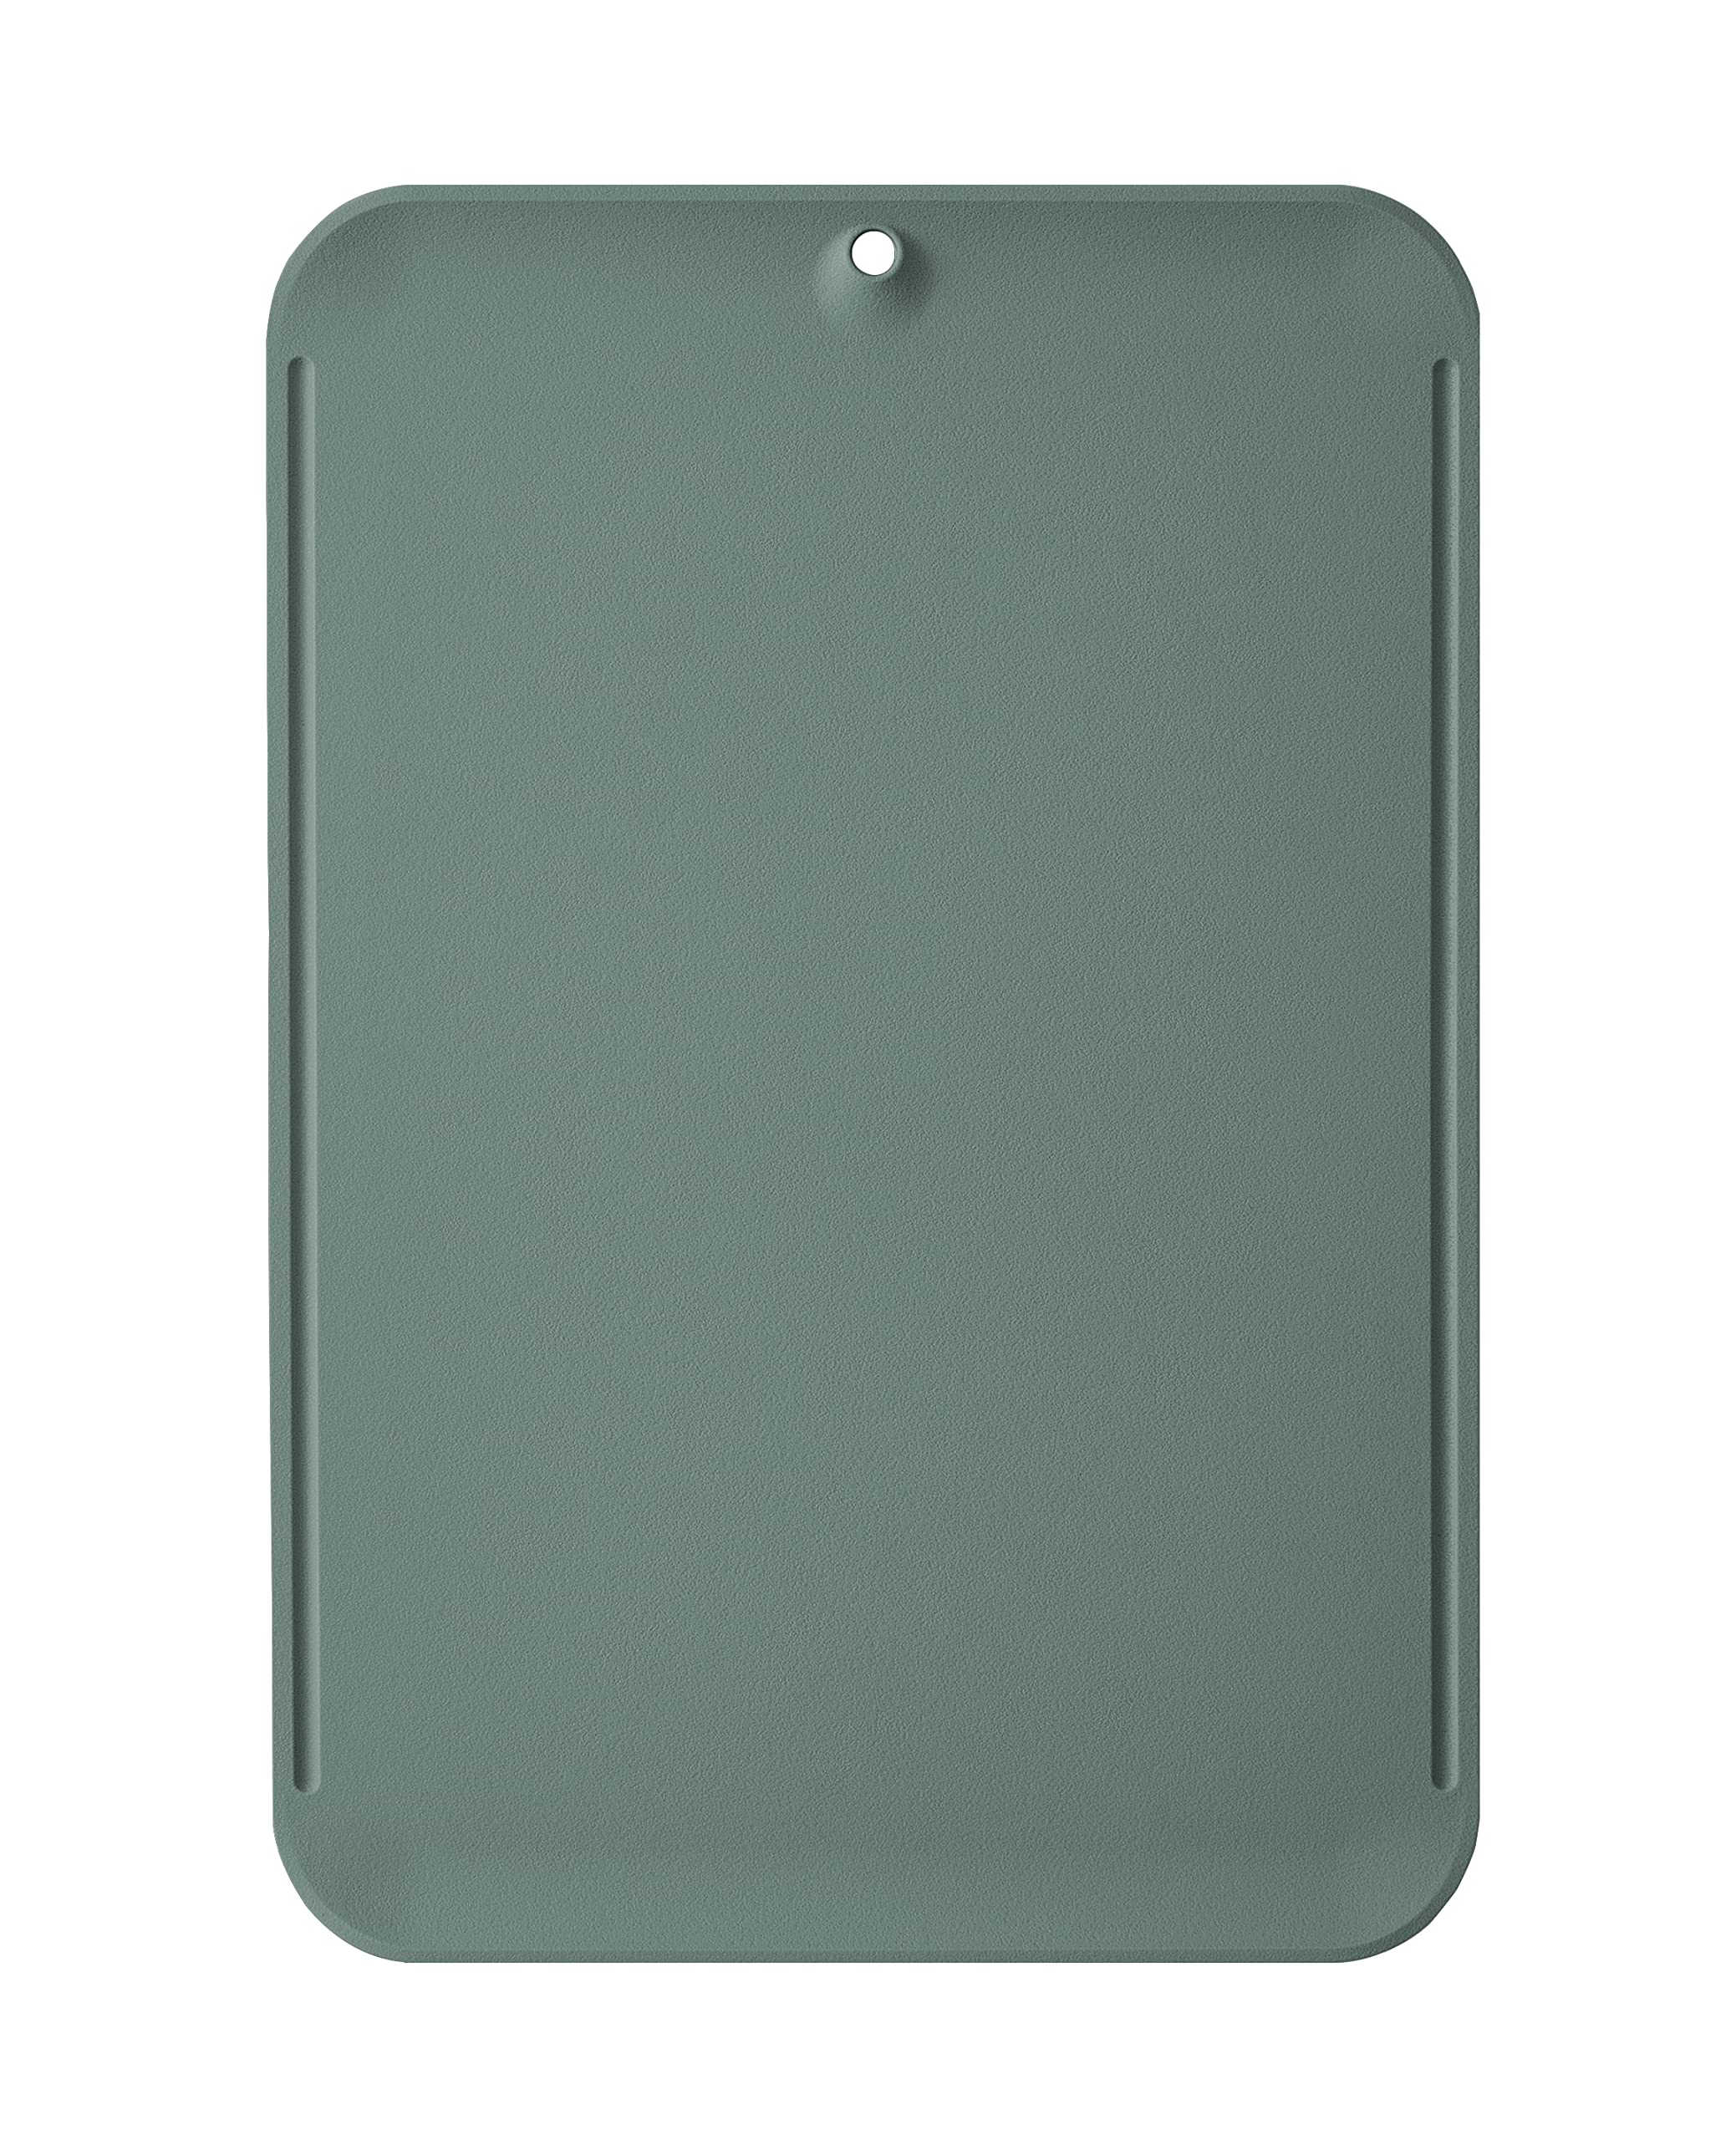 Premium Upgraded doblé Non-Scratch Flexible Cutting Board for Chopping, Scratch Free, Juice Grooves with Easy Grip Handle, Non-Slip Dishwasher Safe for Kitchen 9.3" x 13.7" (Orkid Green)